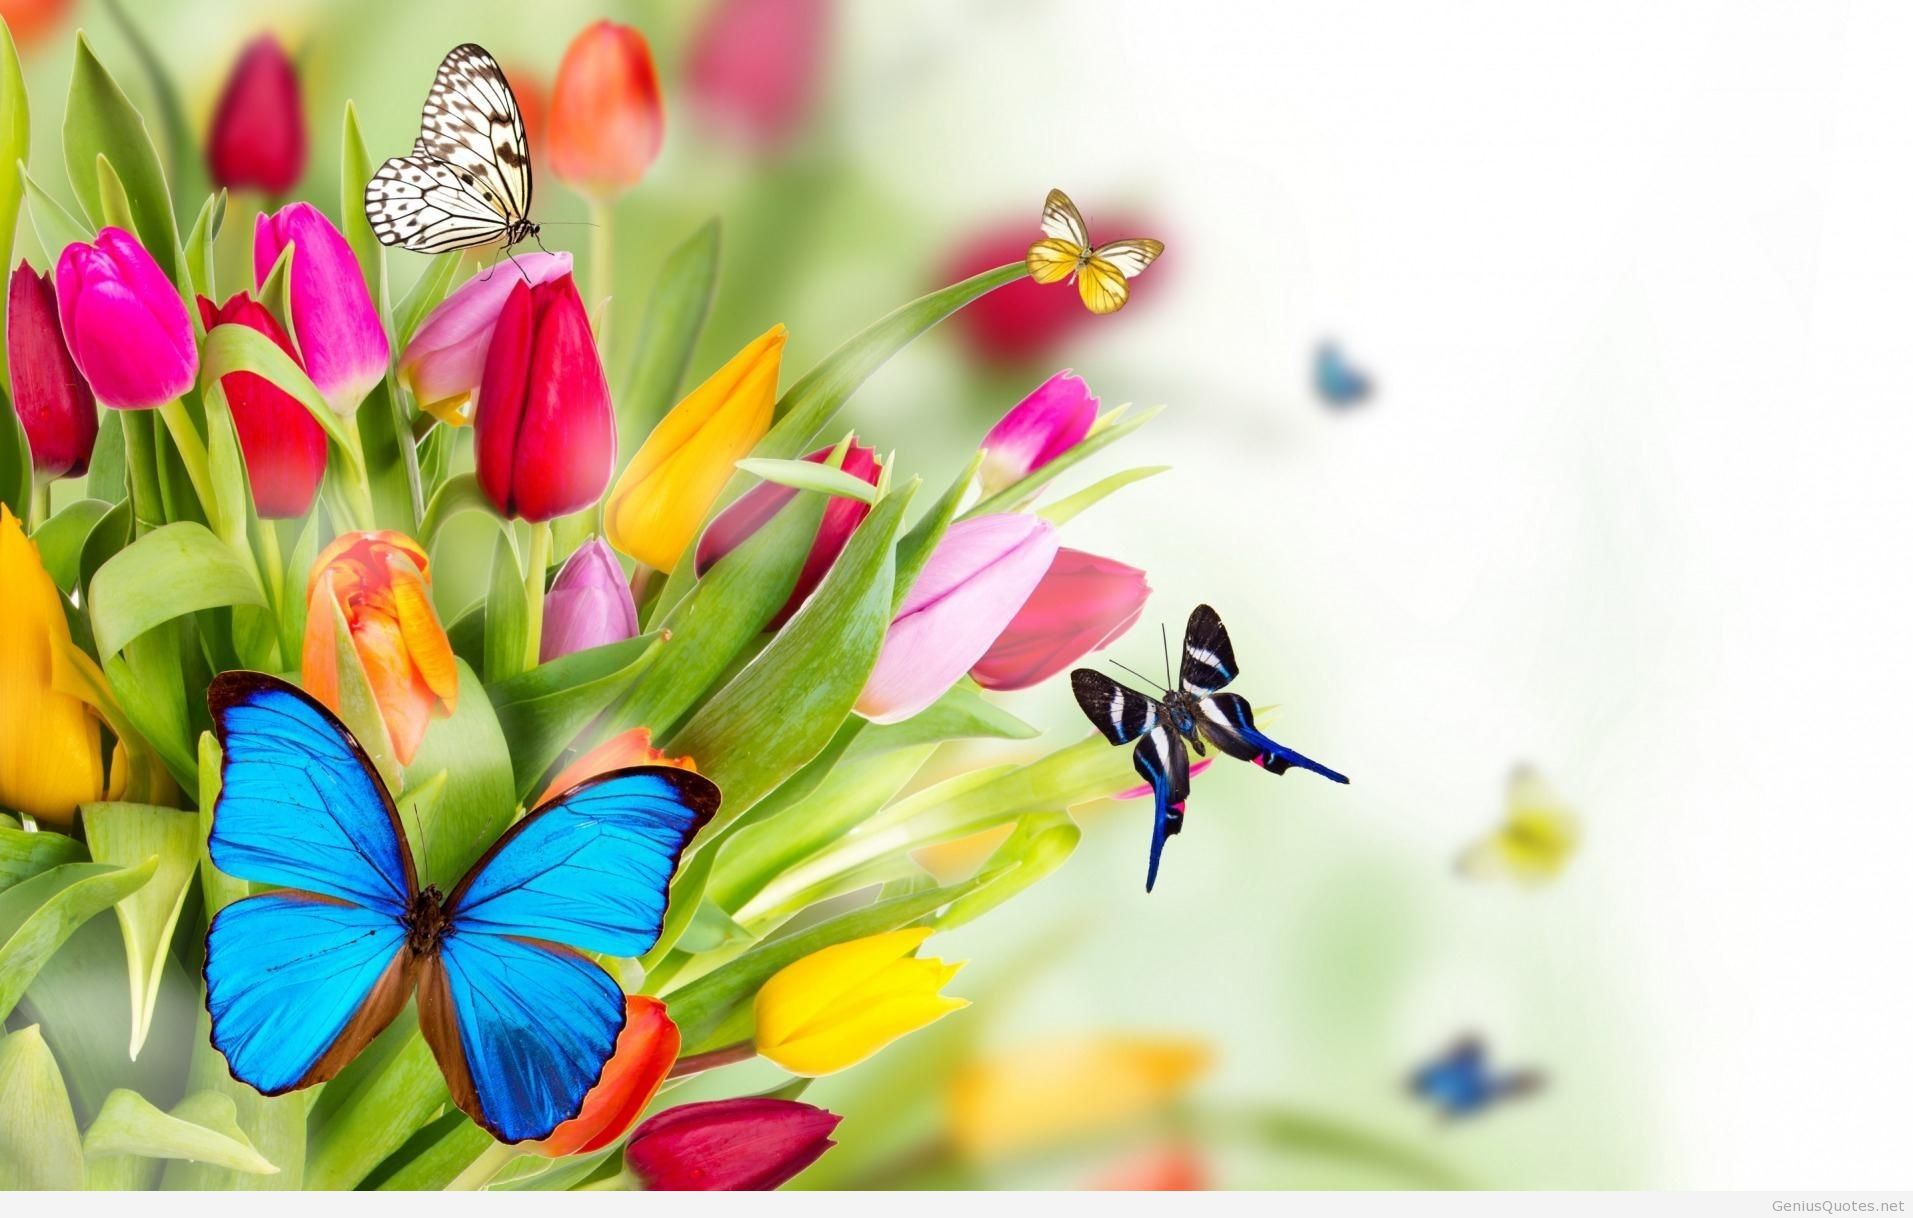 Spring Wallpapers - Flowers Hd Photo Background - HD Wallpaper 